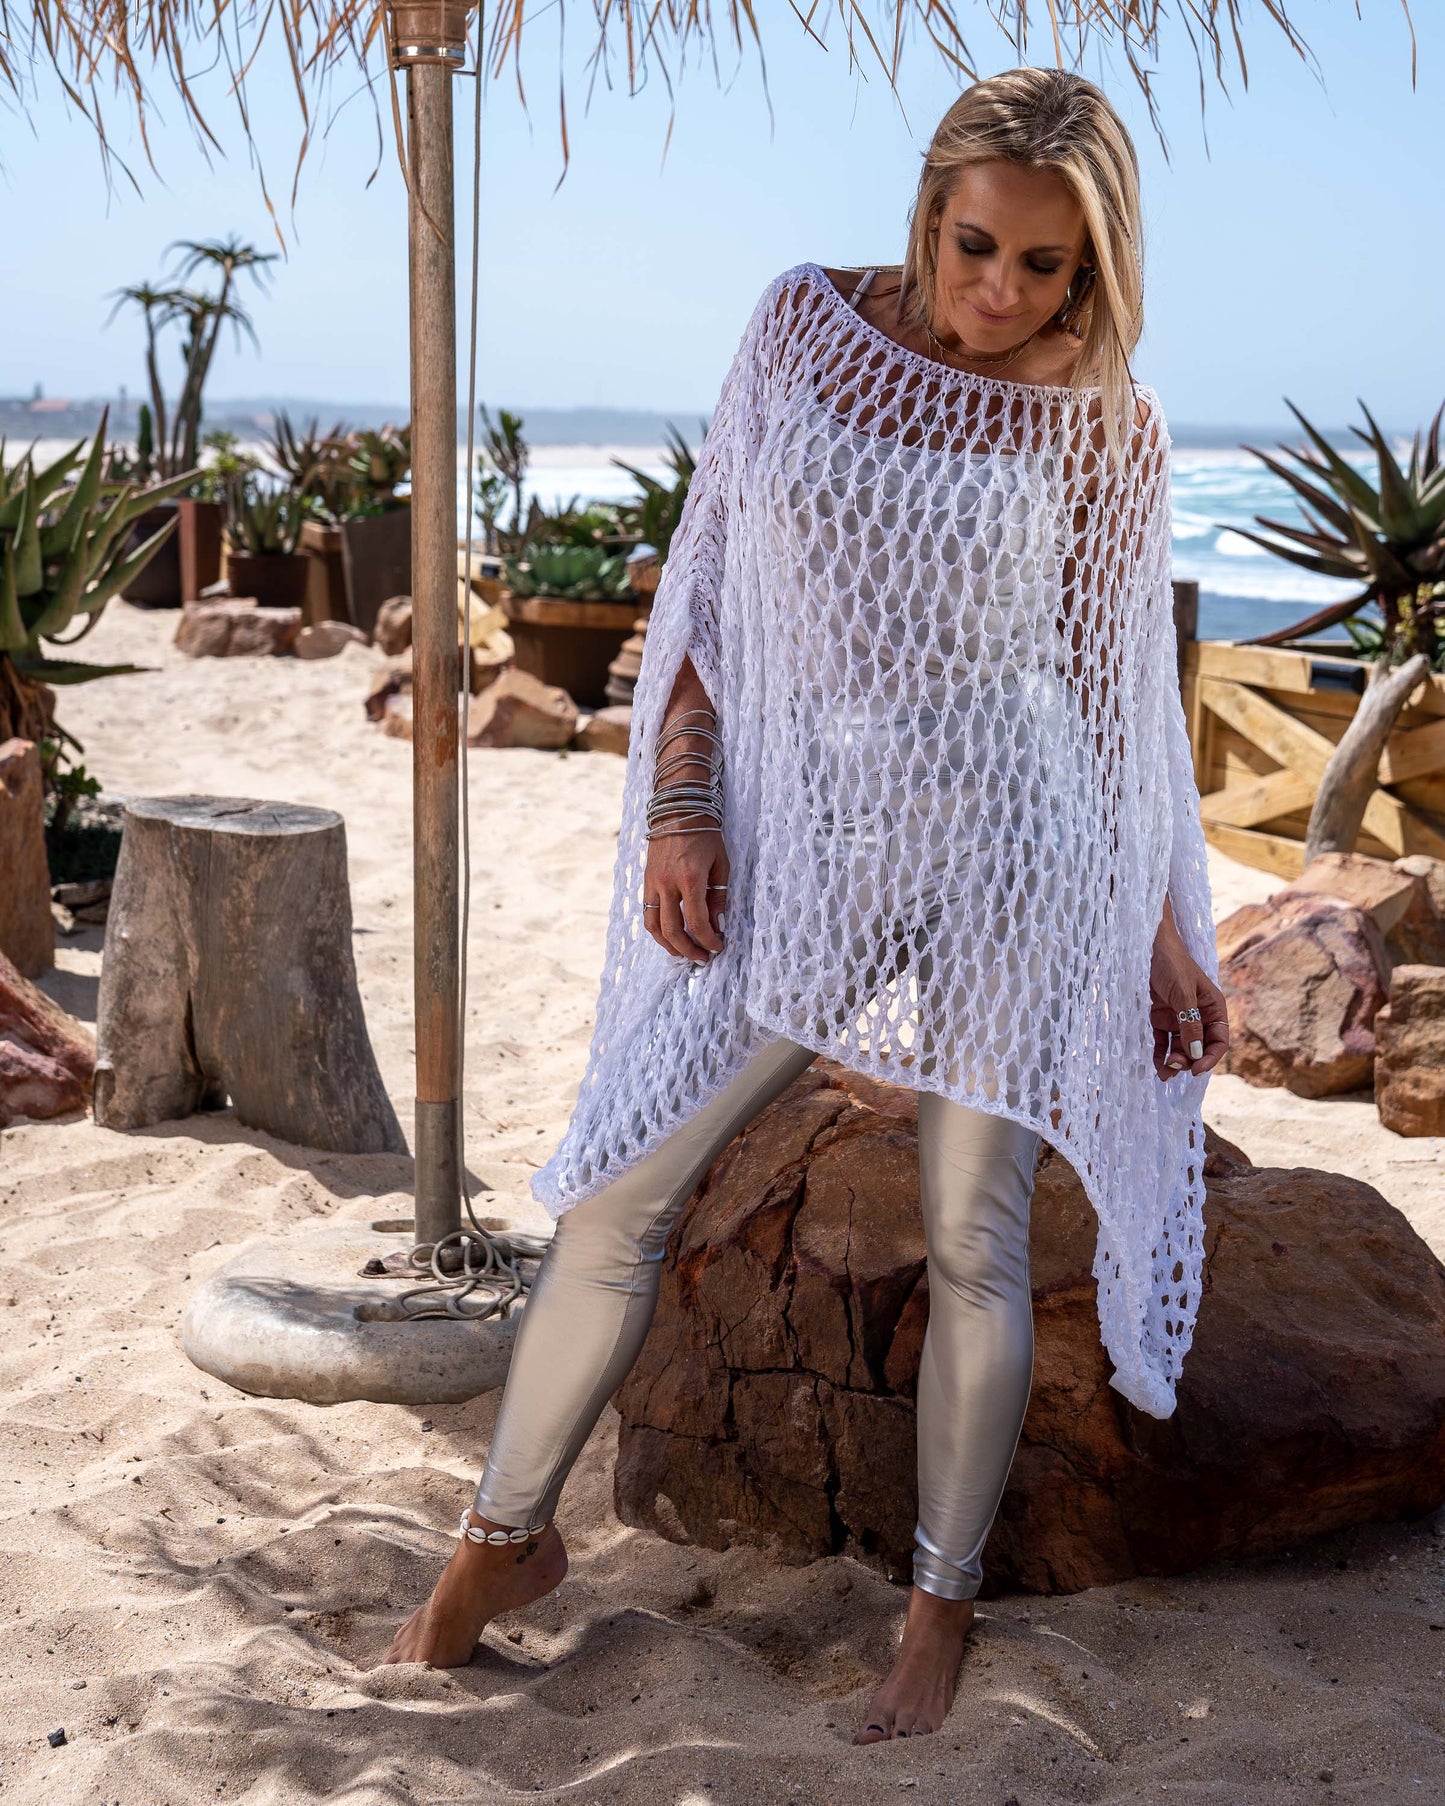 This poncho is designed to envelop you in a cocoon of softness and elegance.Indulge in the luxurious feel of its premium, loosely knitted fabric that drapes effortlessly over your shoulders. The ultra-soft material gently caresses your skin, providing unparalleled comfort. The loose-knit construction adds a touch of airy sophistication, allowing for breathability